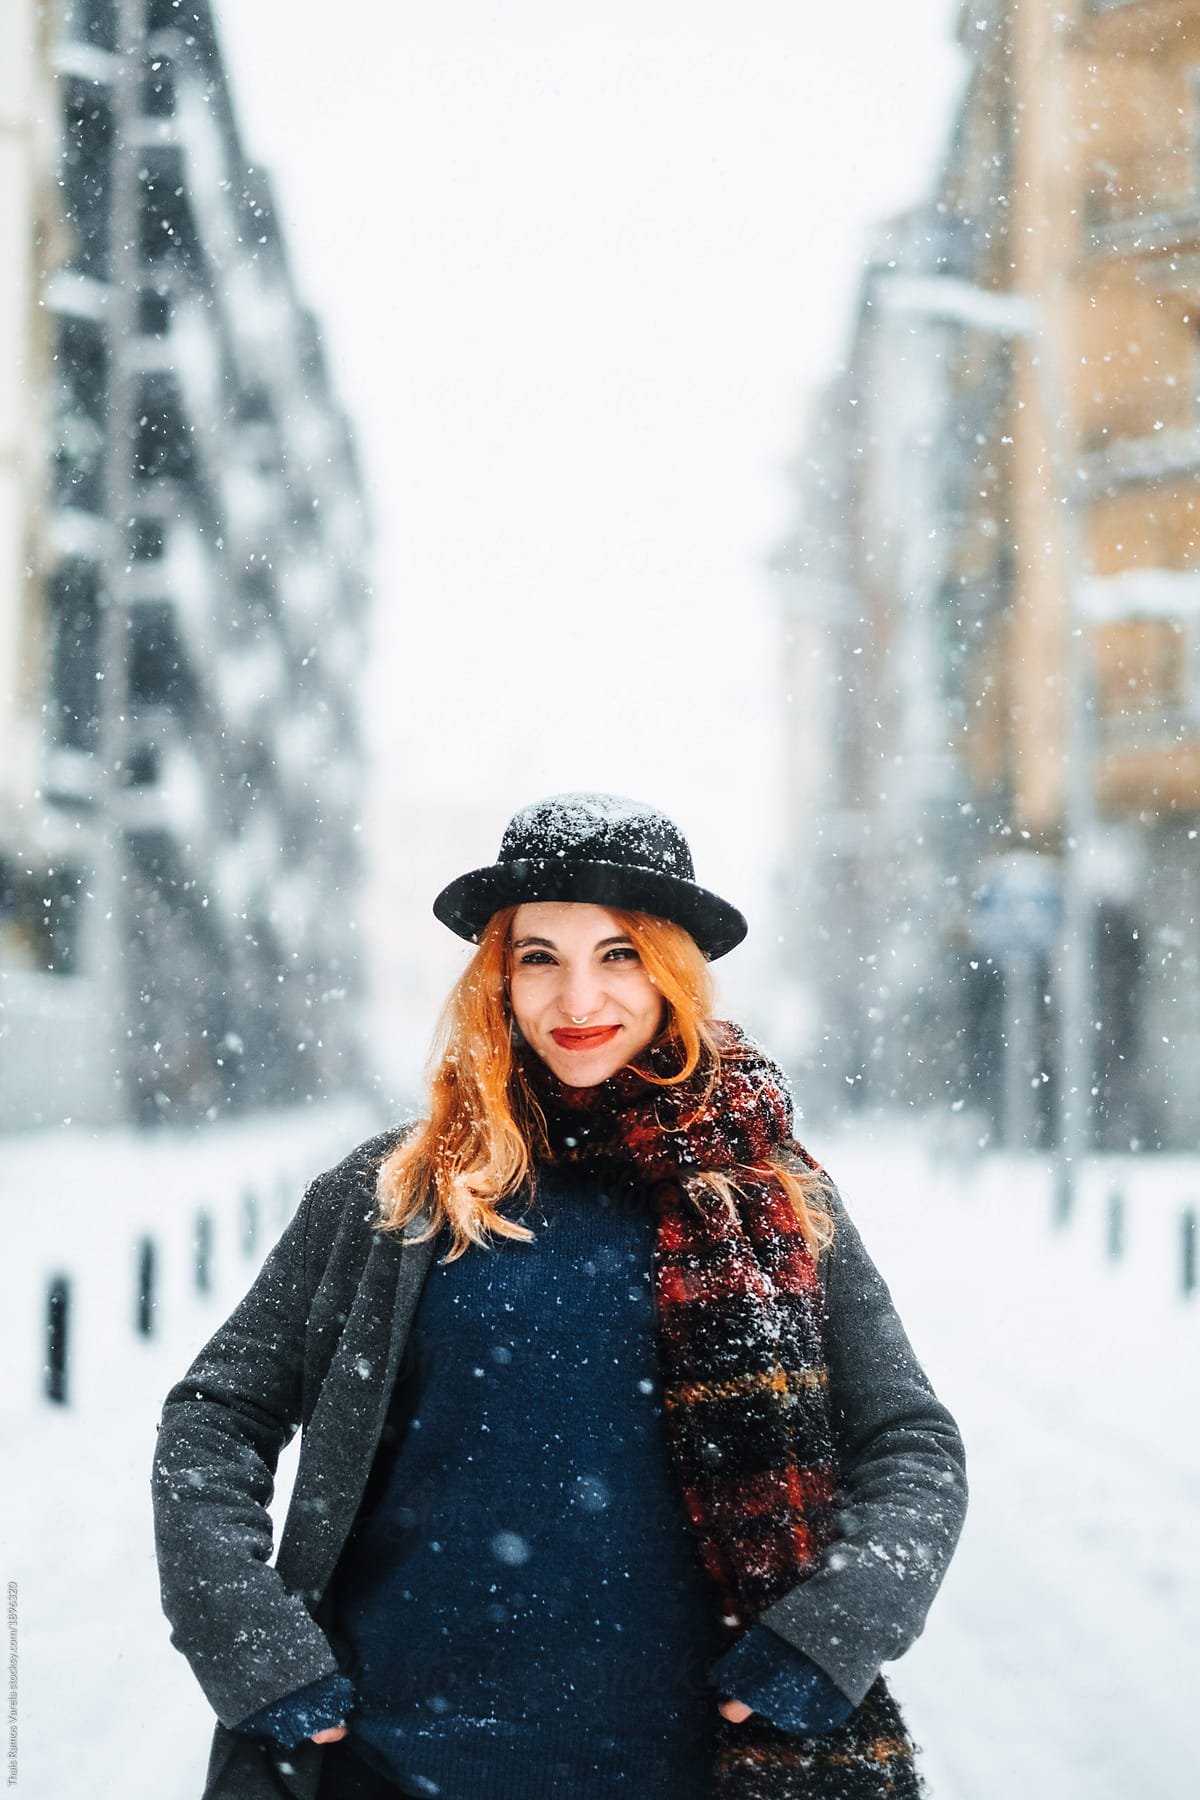 potrait of a woman in a snowy landscape  smiling